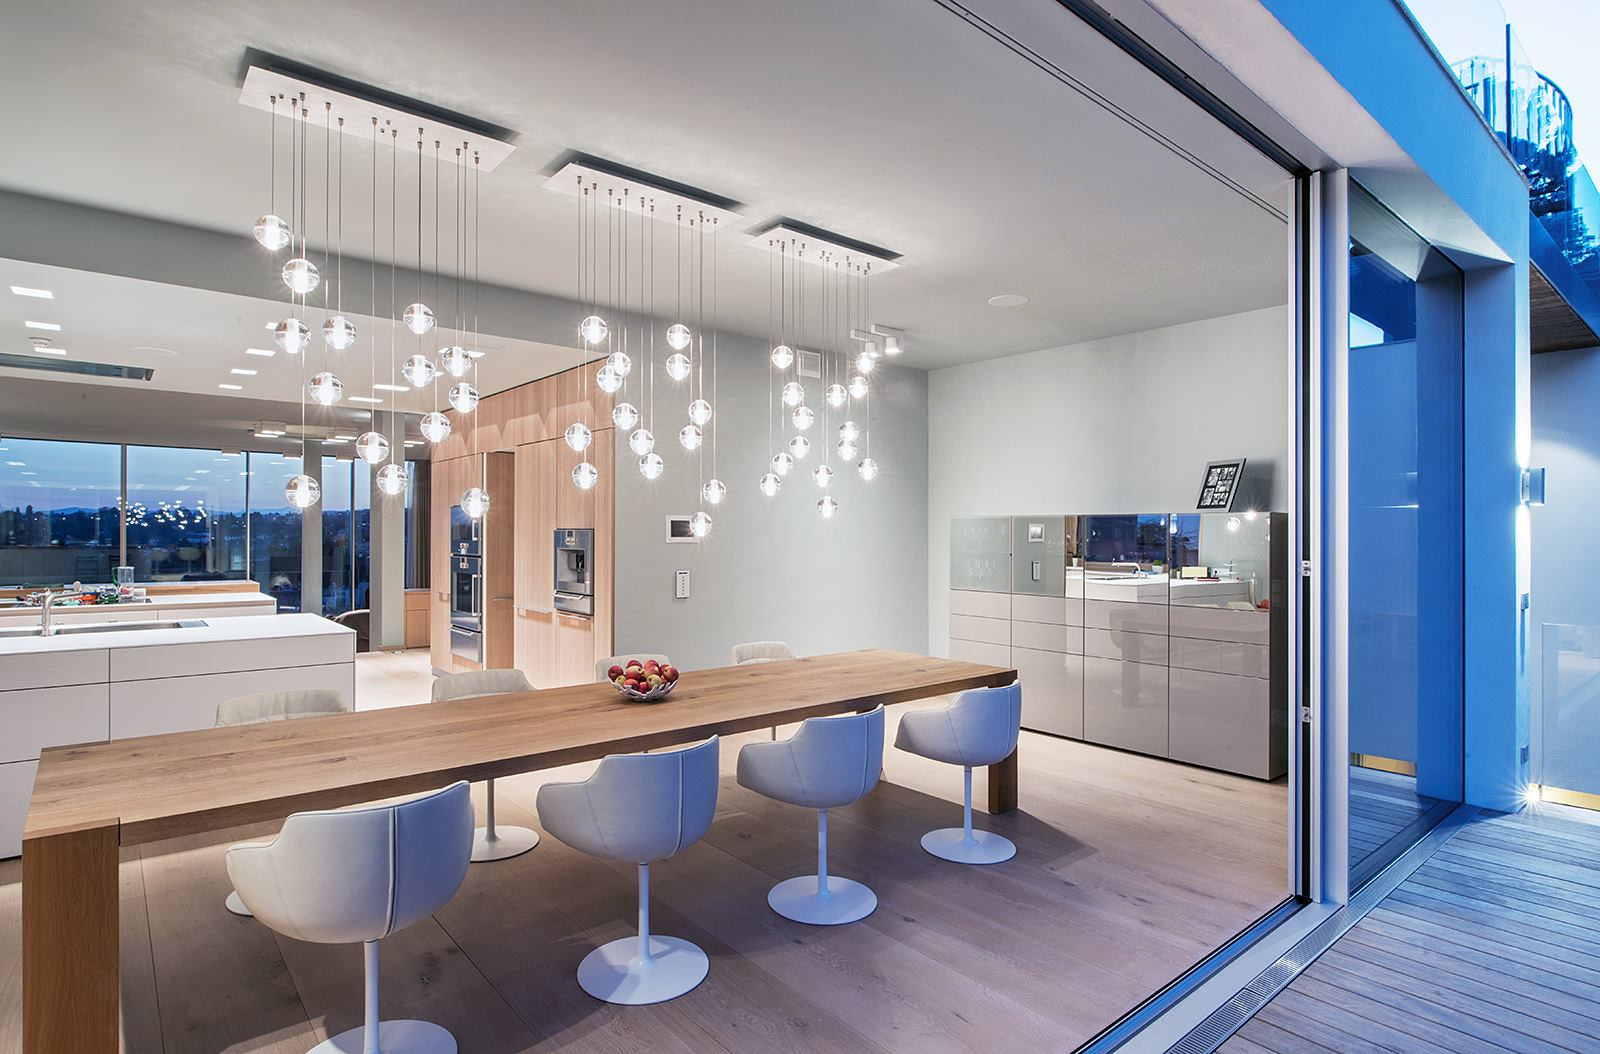 Bocci LED Pendant Lights 14 Series in Dining Room - Contemporary - Dining  Room - Sydney - by GoLights | Houzz